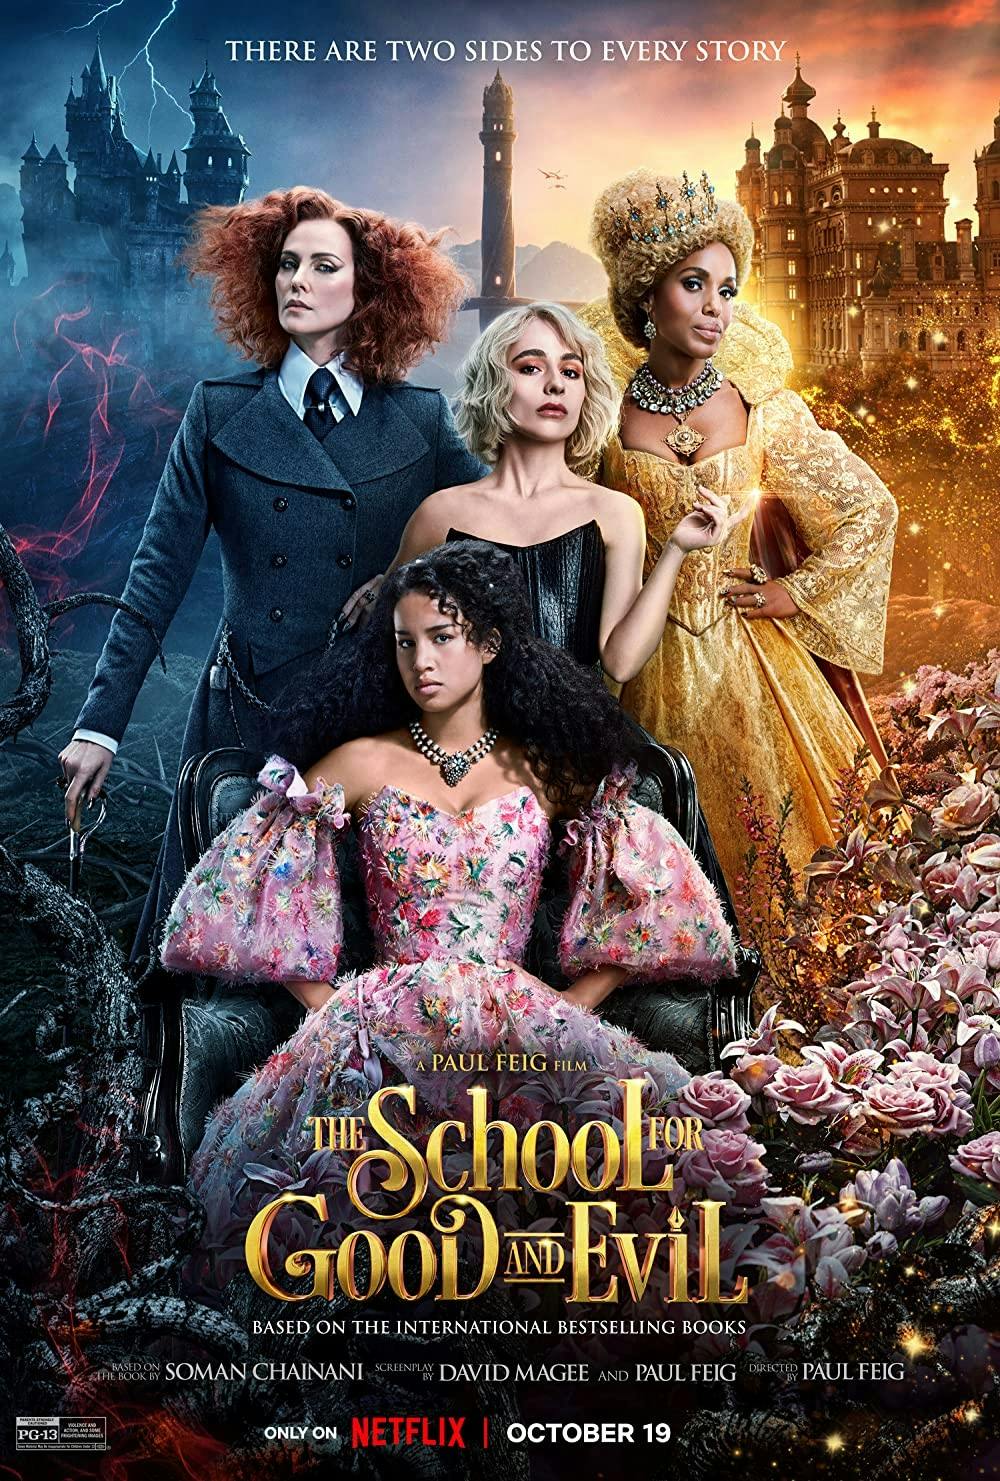 Review: 'The School for Good and Evil' is a fascinating fantasy film